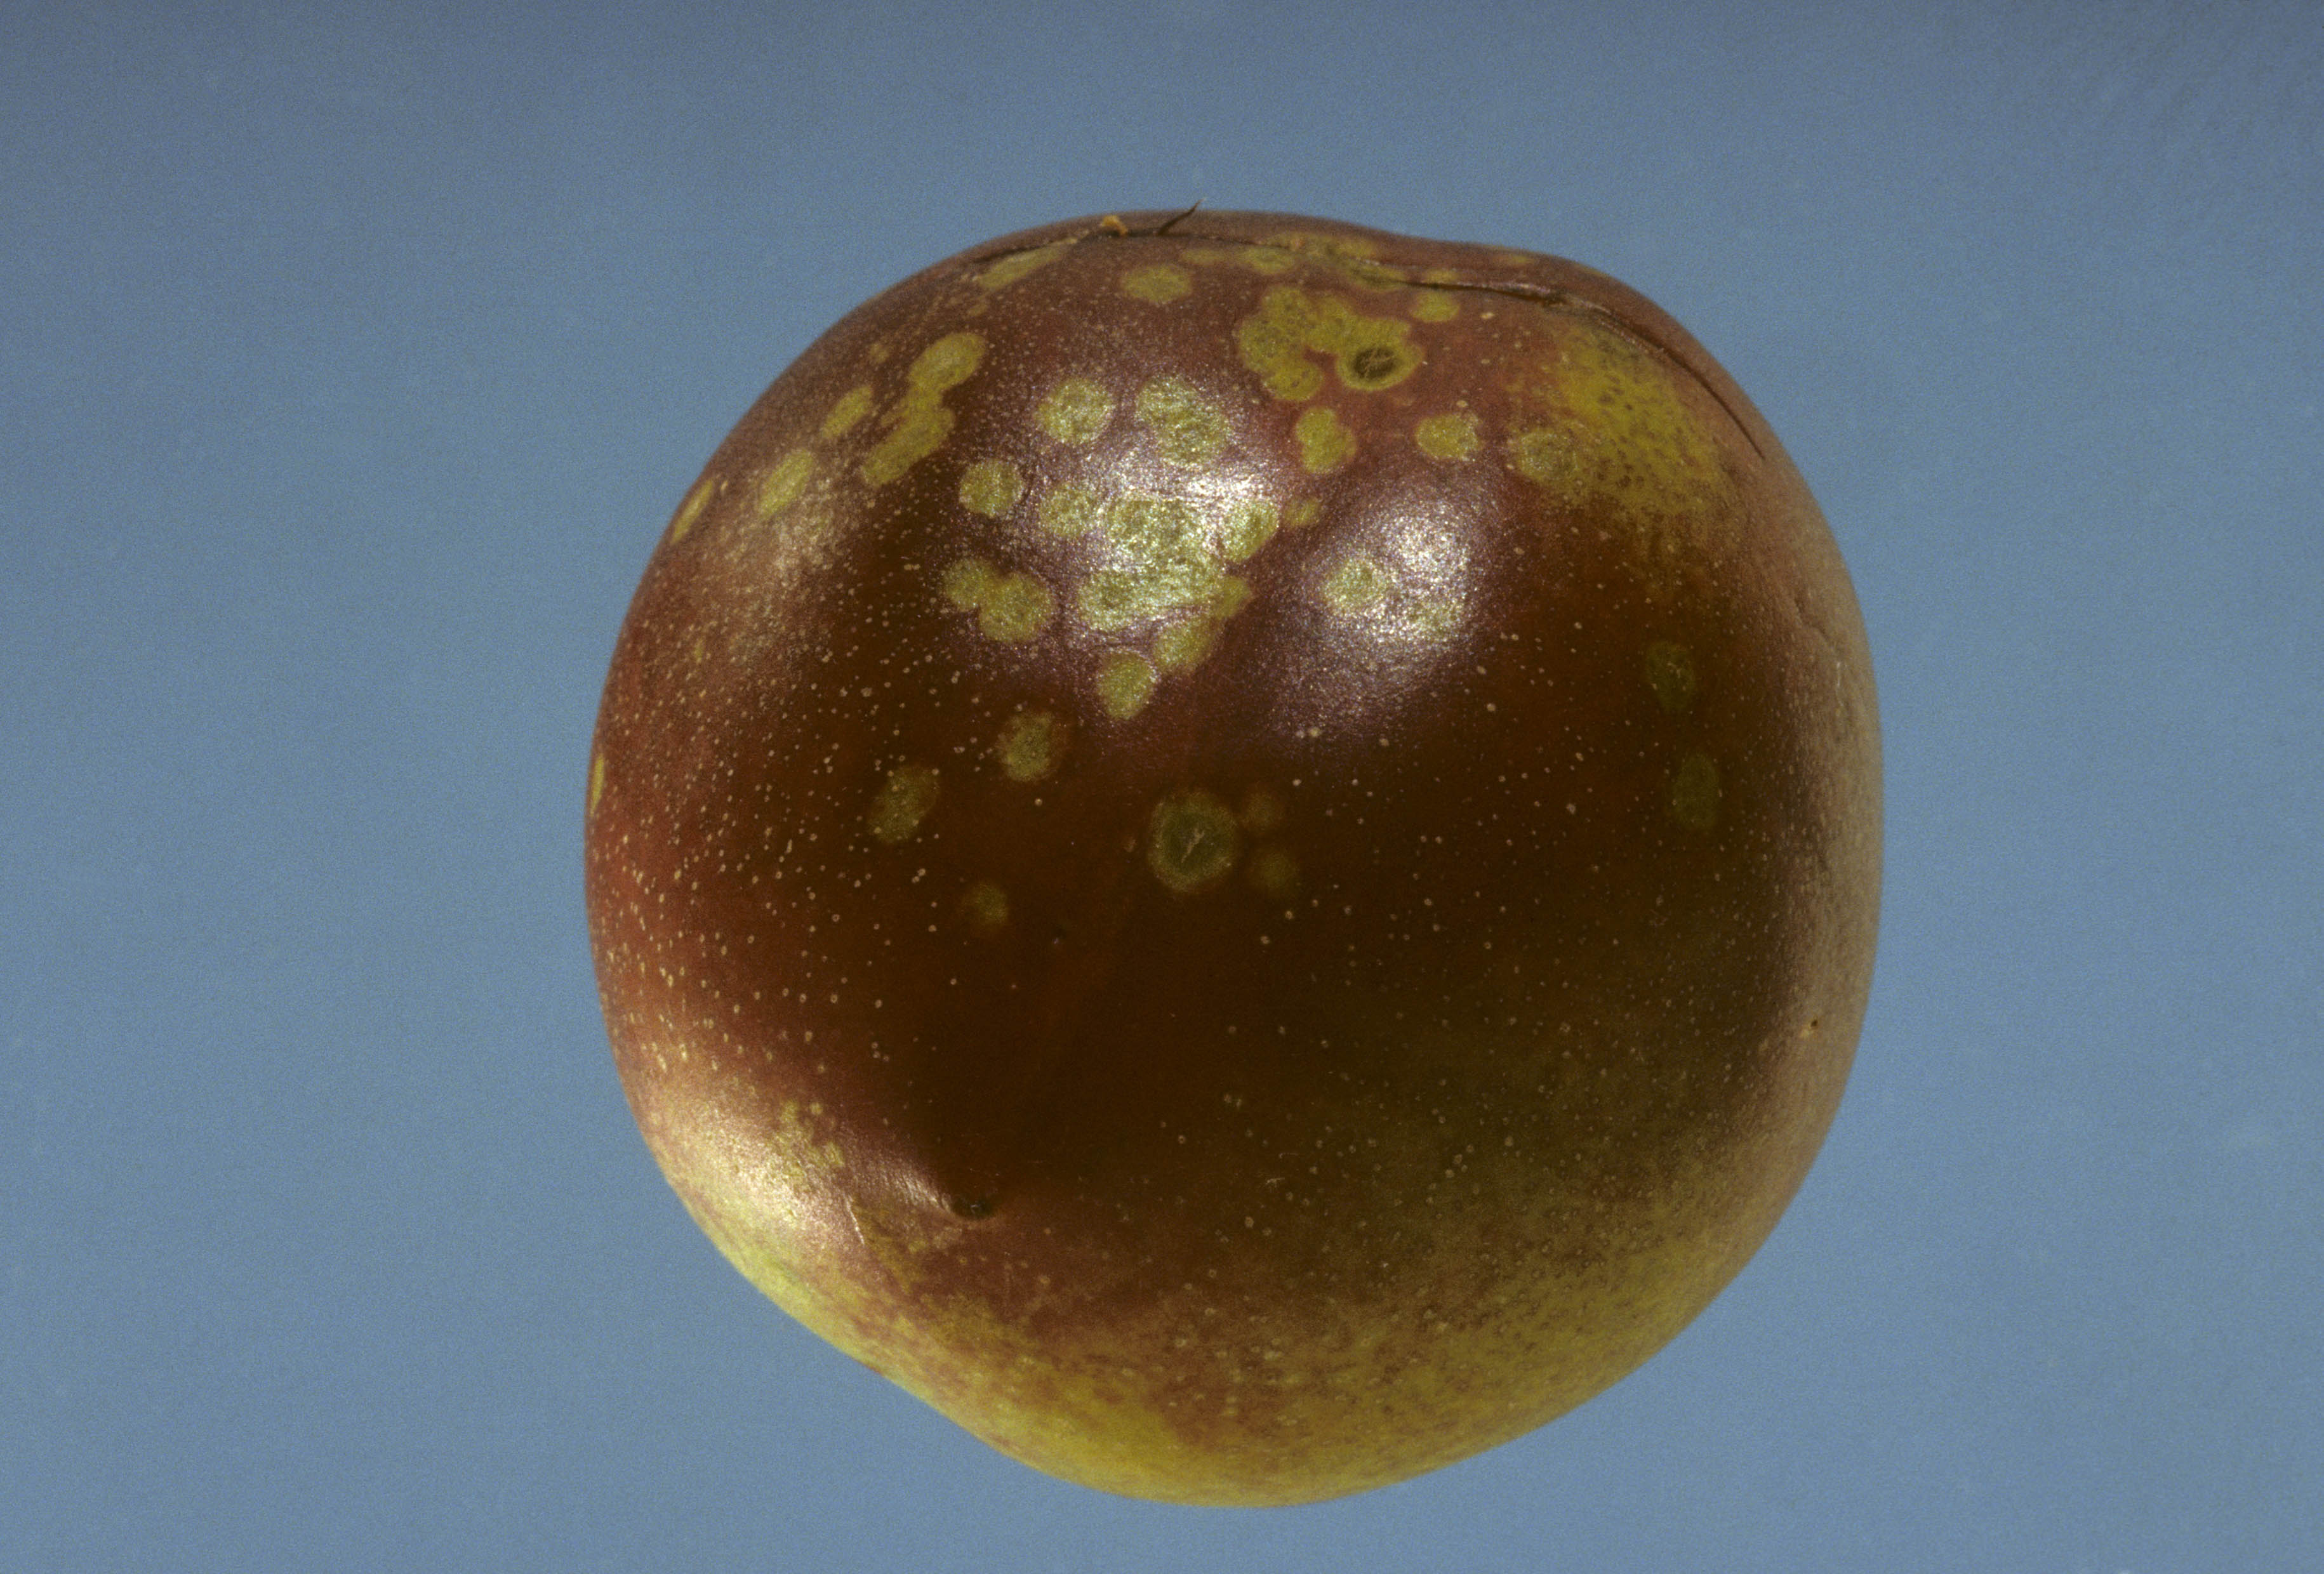 Figure 5. Freckle on a nectarine.